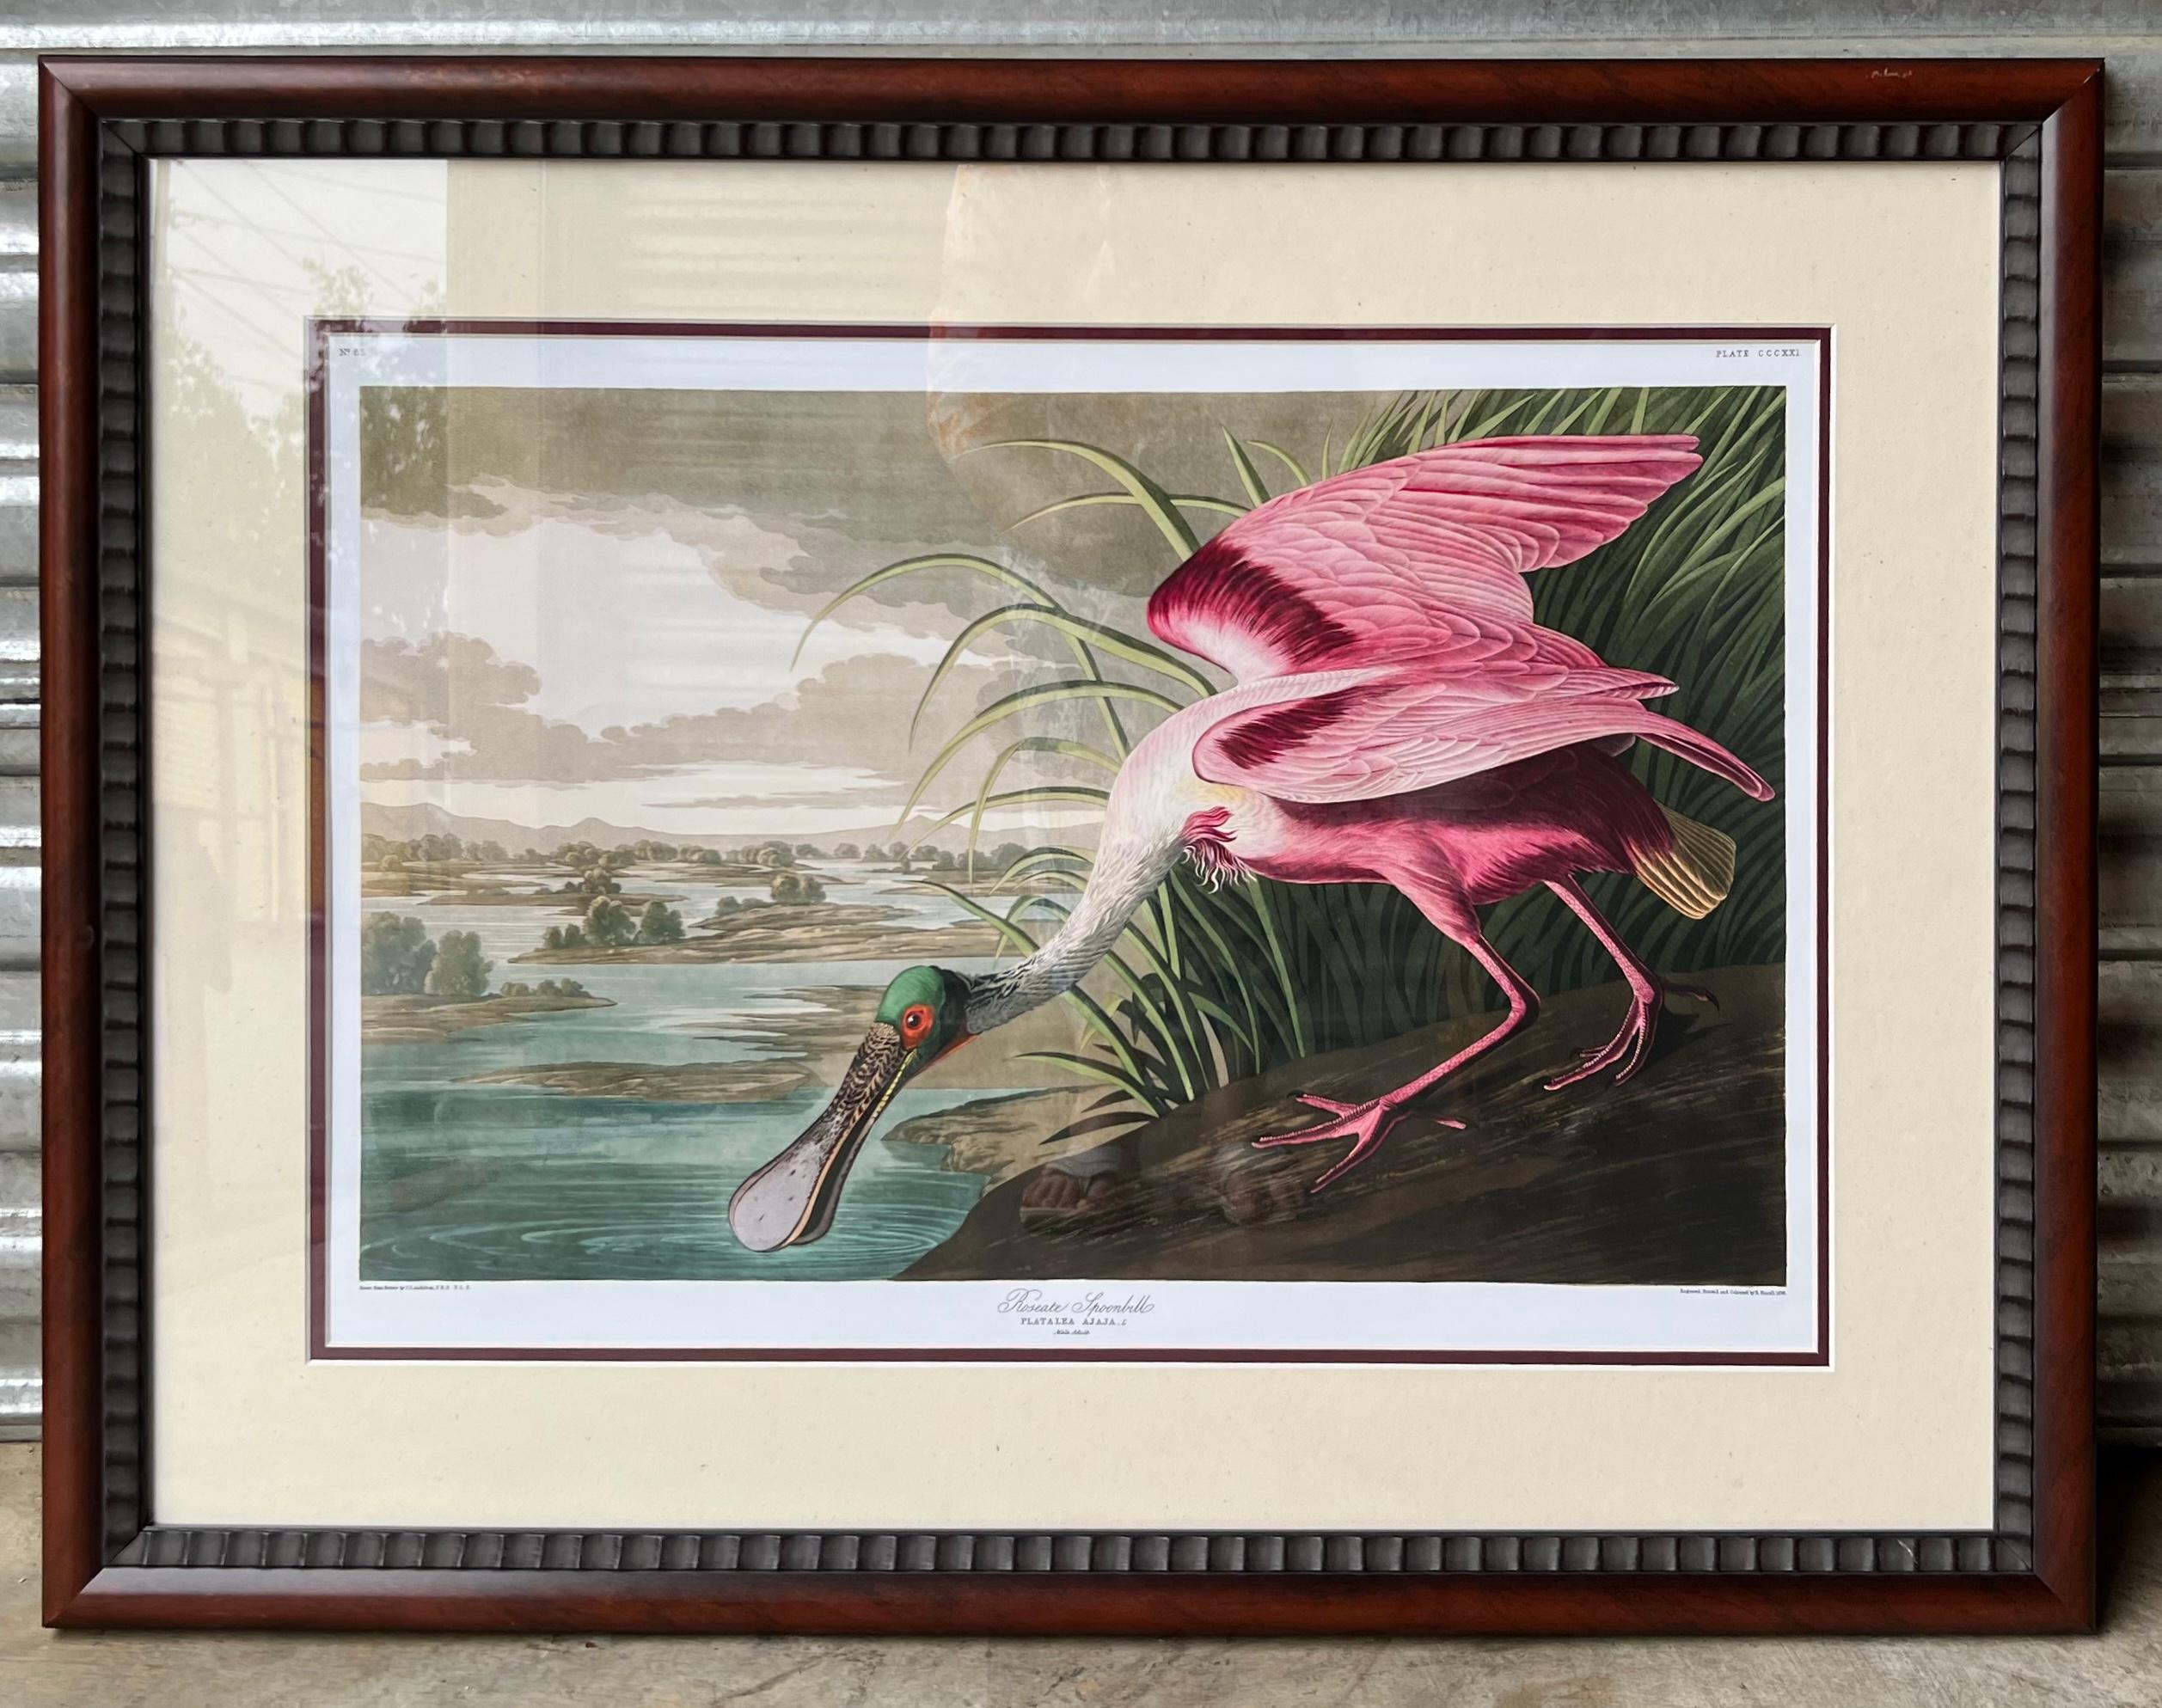 This is a lovely framed print by John J. Audubon of the Roseate Spoonbill, a Gulf bird. Audubon’s bird studies occurred primarily between 1827 and 1838. This is nicely framed in a mahogany frame. I have other Gulf birds if interested.